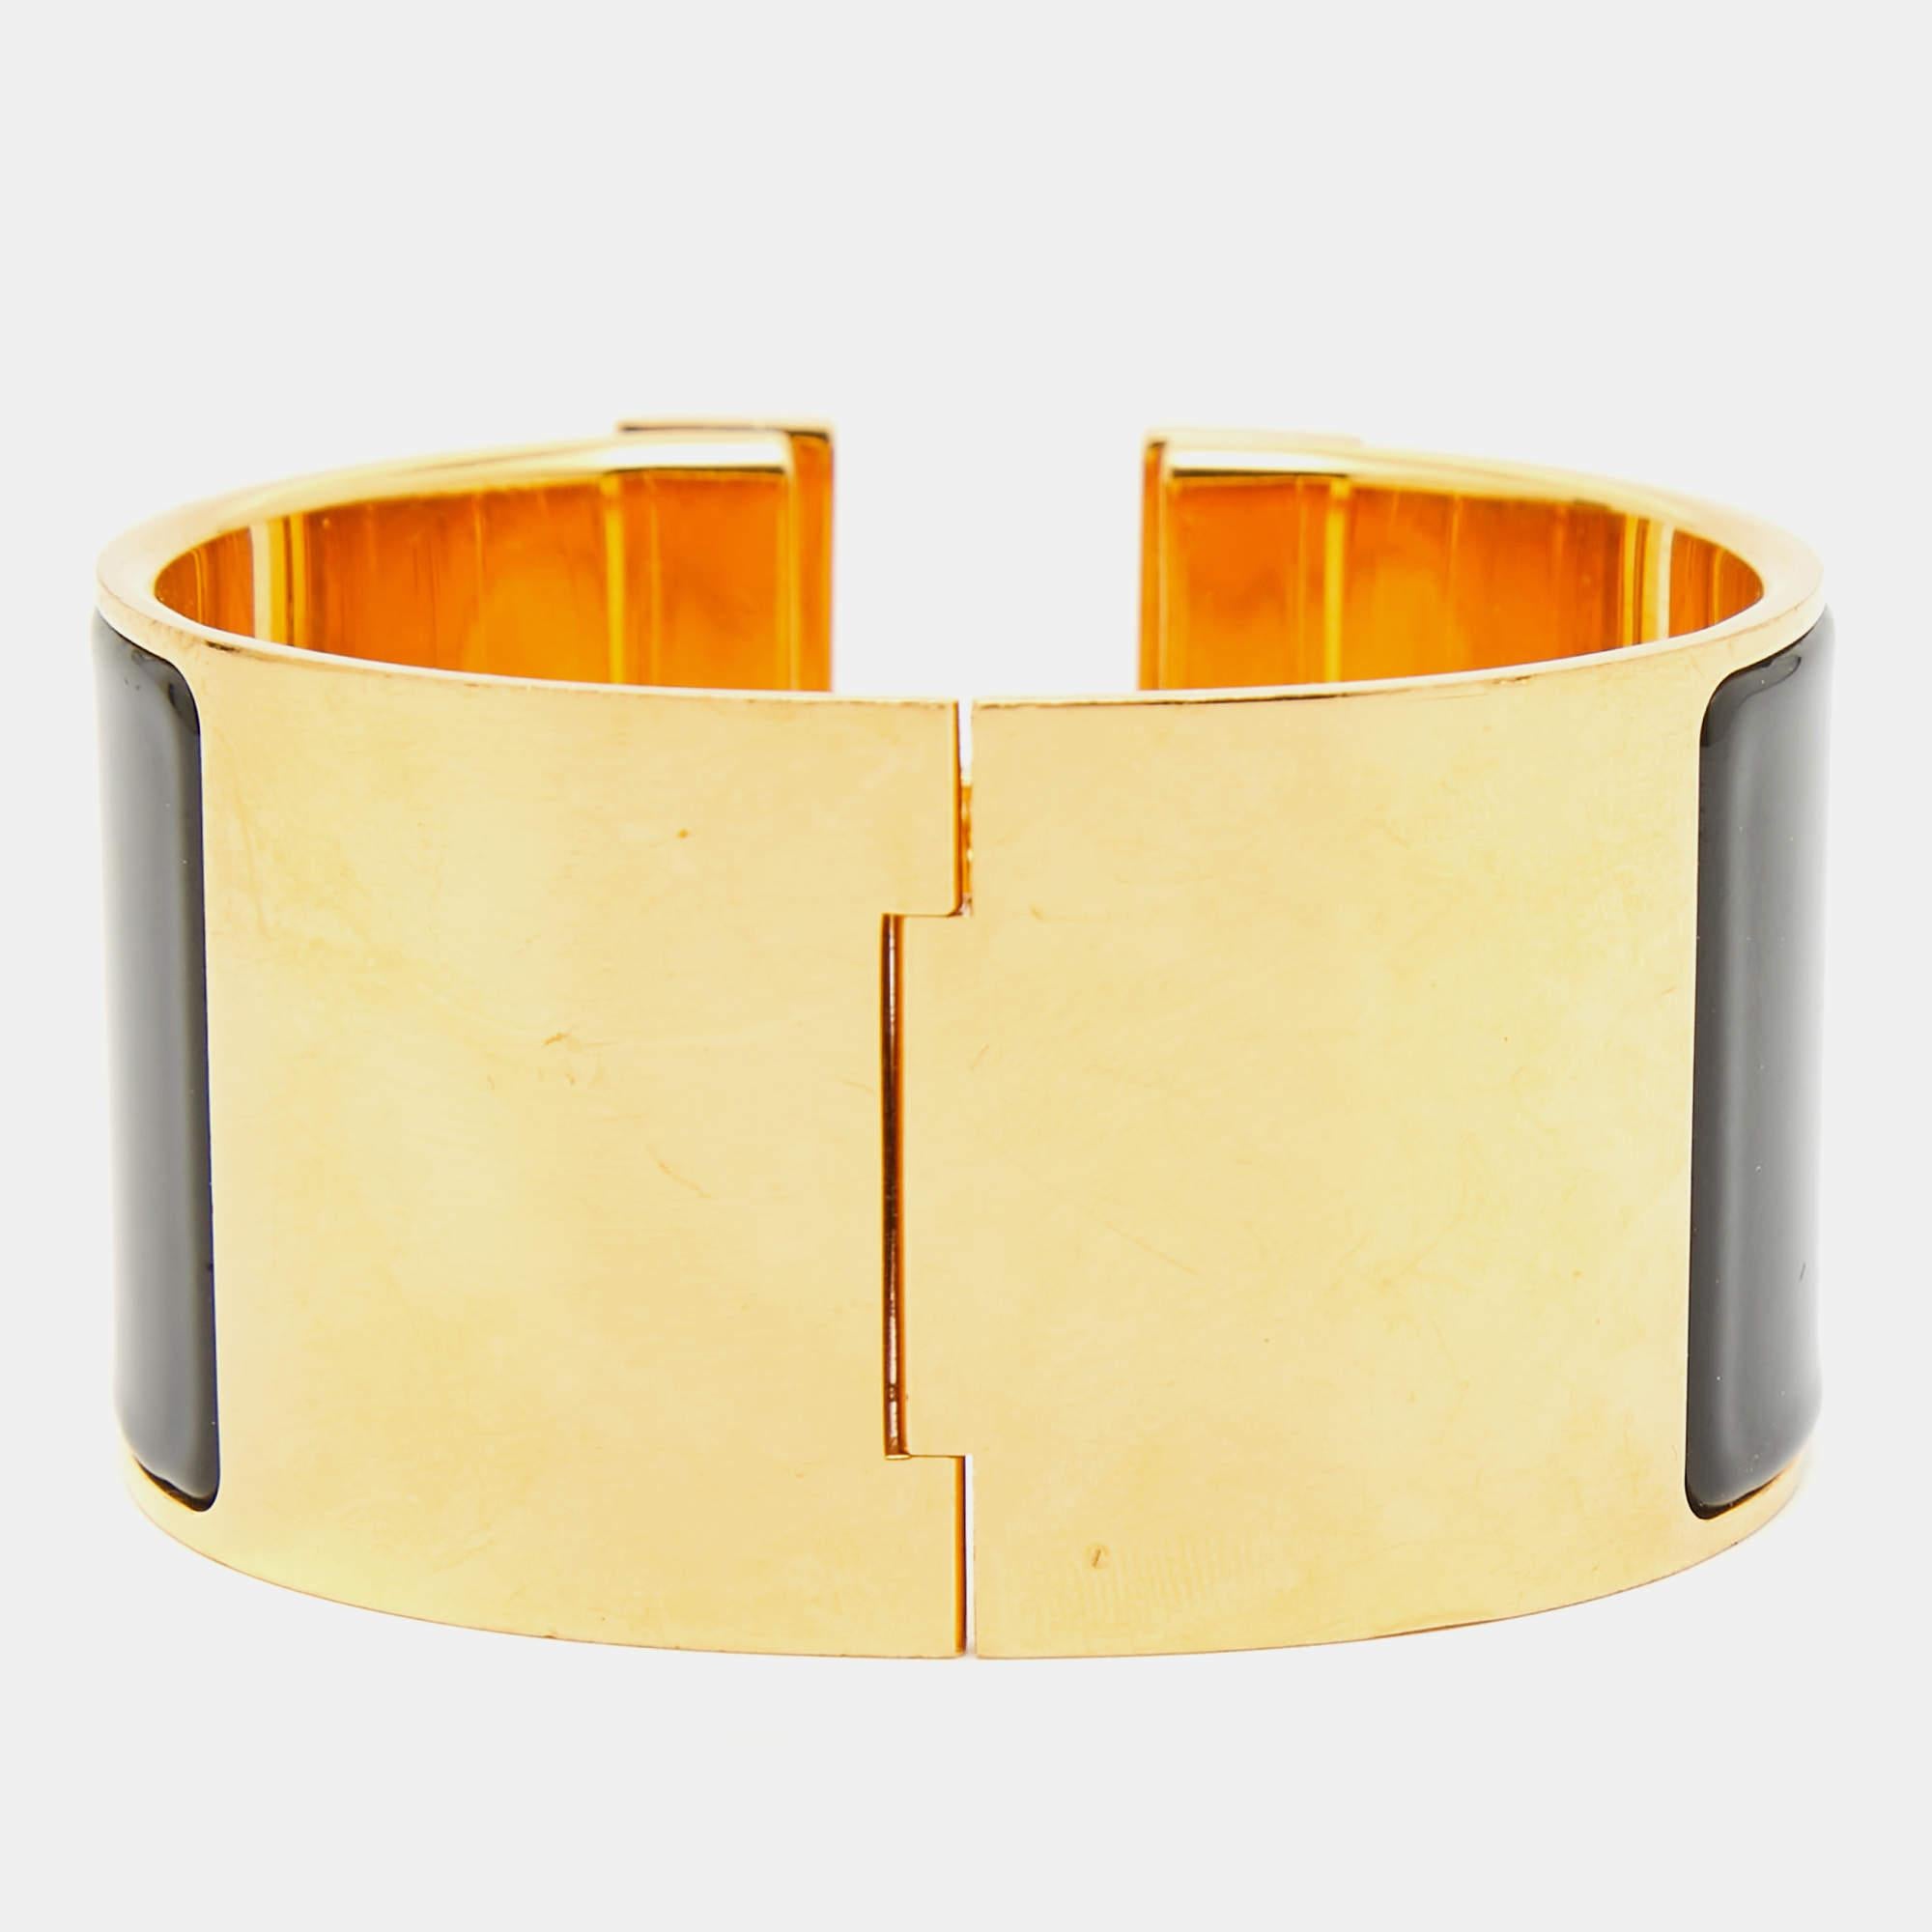 The Hermès Clic Clac H bracelet is an exquisite piece of jewelry. It features a glossy enamel band with a prominent gold-plated H-shaped clasp, creating a striking contrast. This luxurious and elegant accessory embodies timeless style and